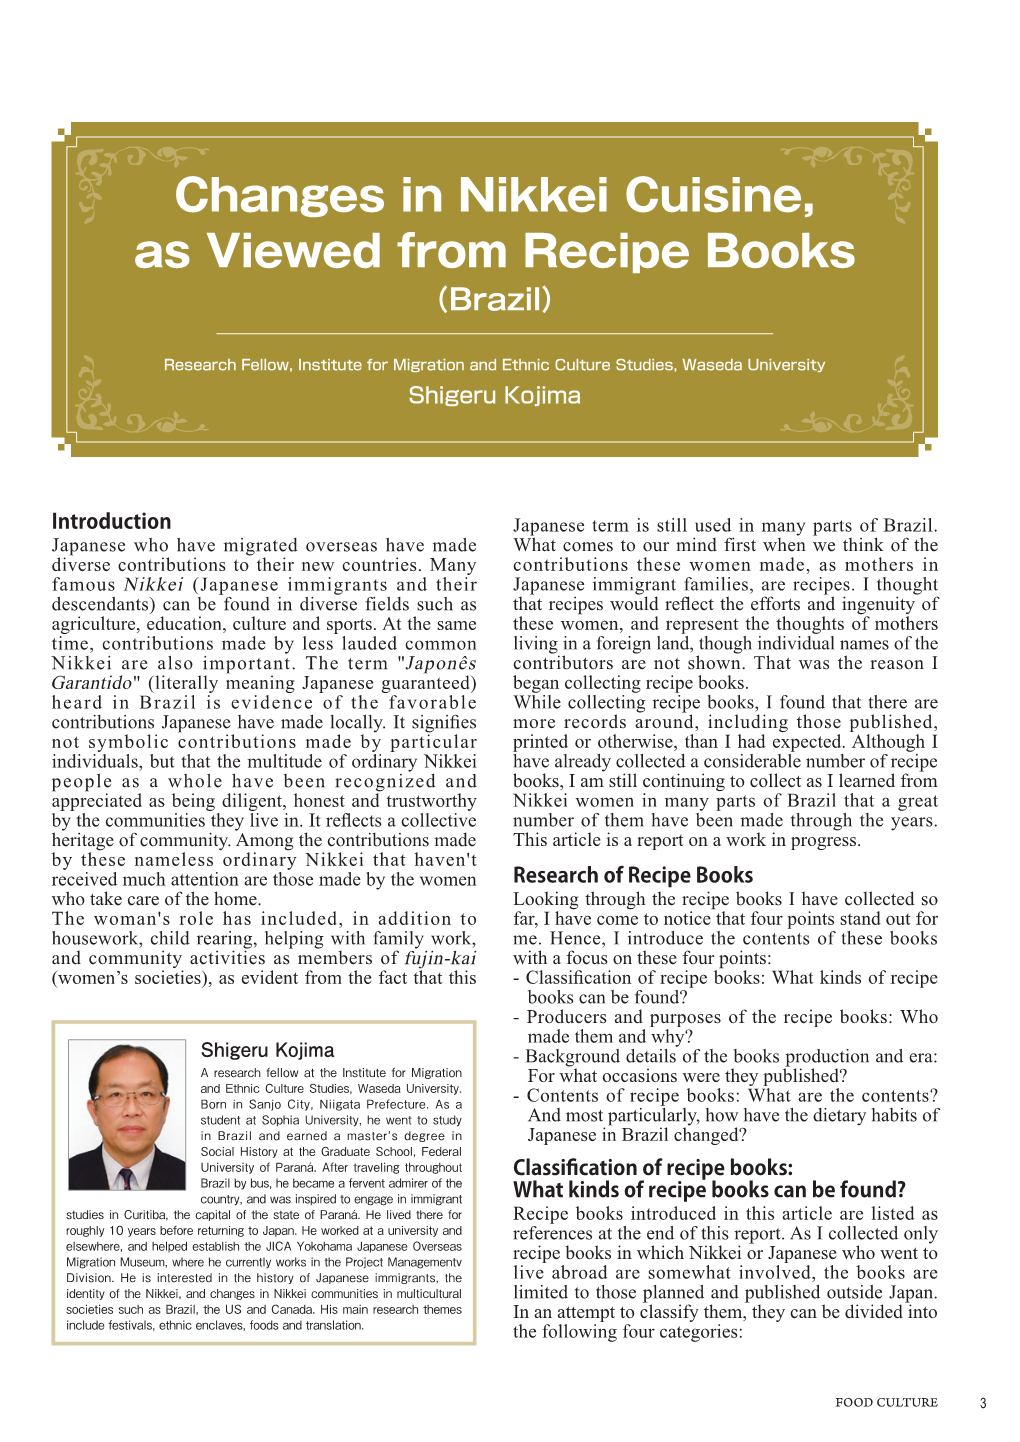 Changes in Nikkei Cuisine, As Viewed from Recipe Books （Brazil）